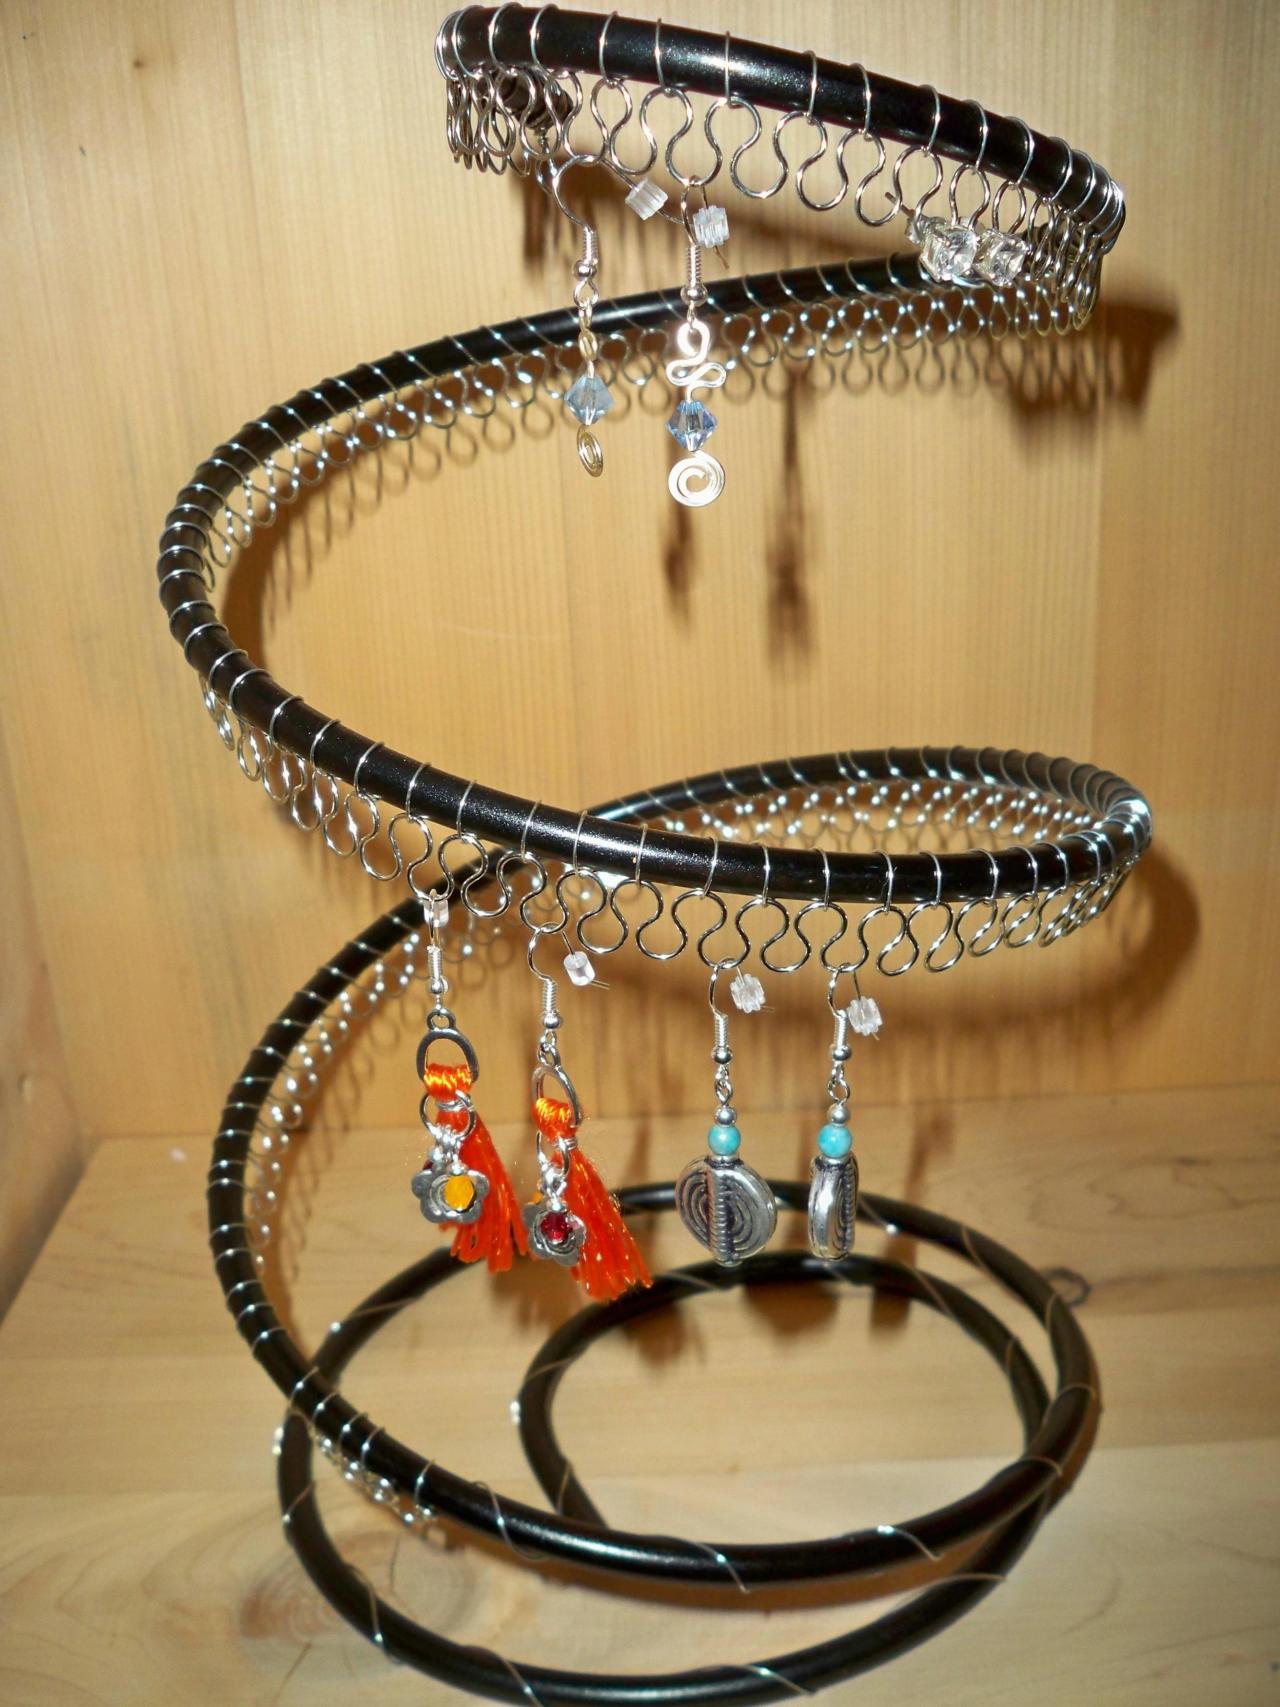 Spiral Black Earring Tree Holder, Organizer. Holds Approximately 60 Pairs